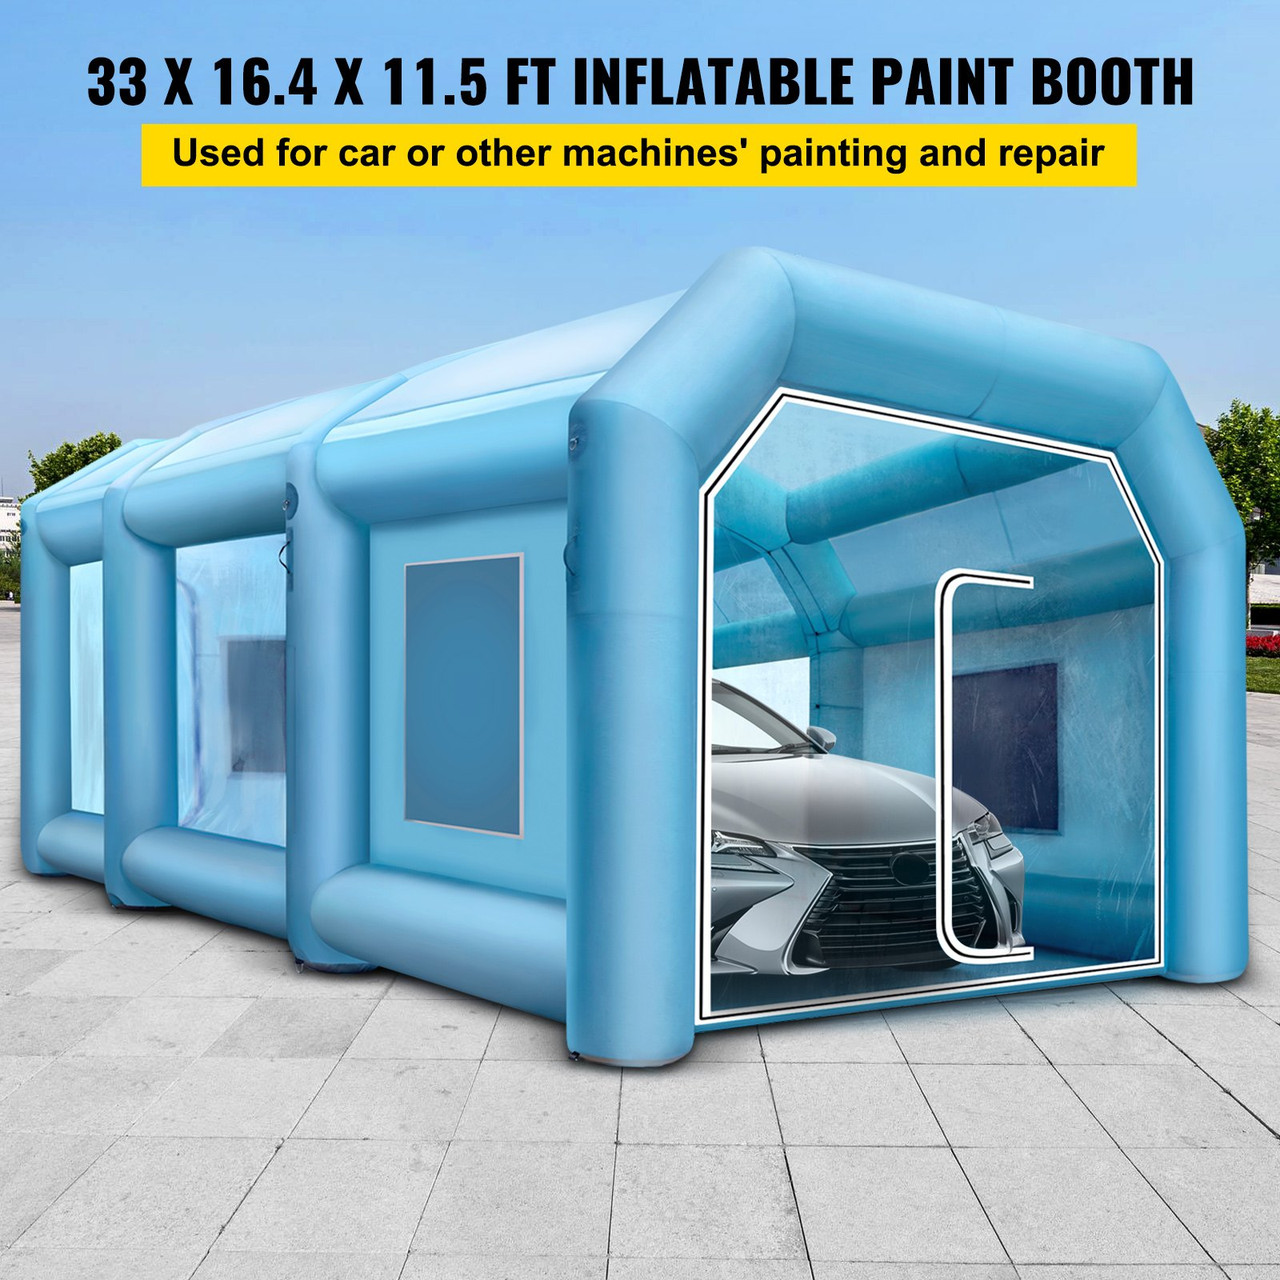 VEVOR 33x16.4x11.5FT Inflatable Spray Booth Car Paint Tent 1100w+350w Blowers